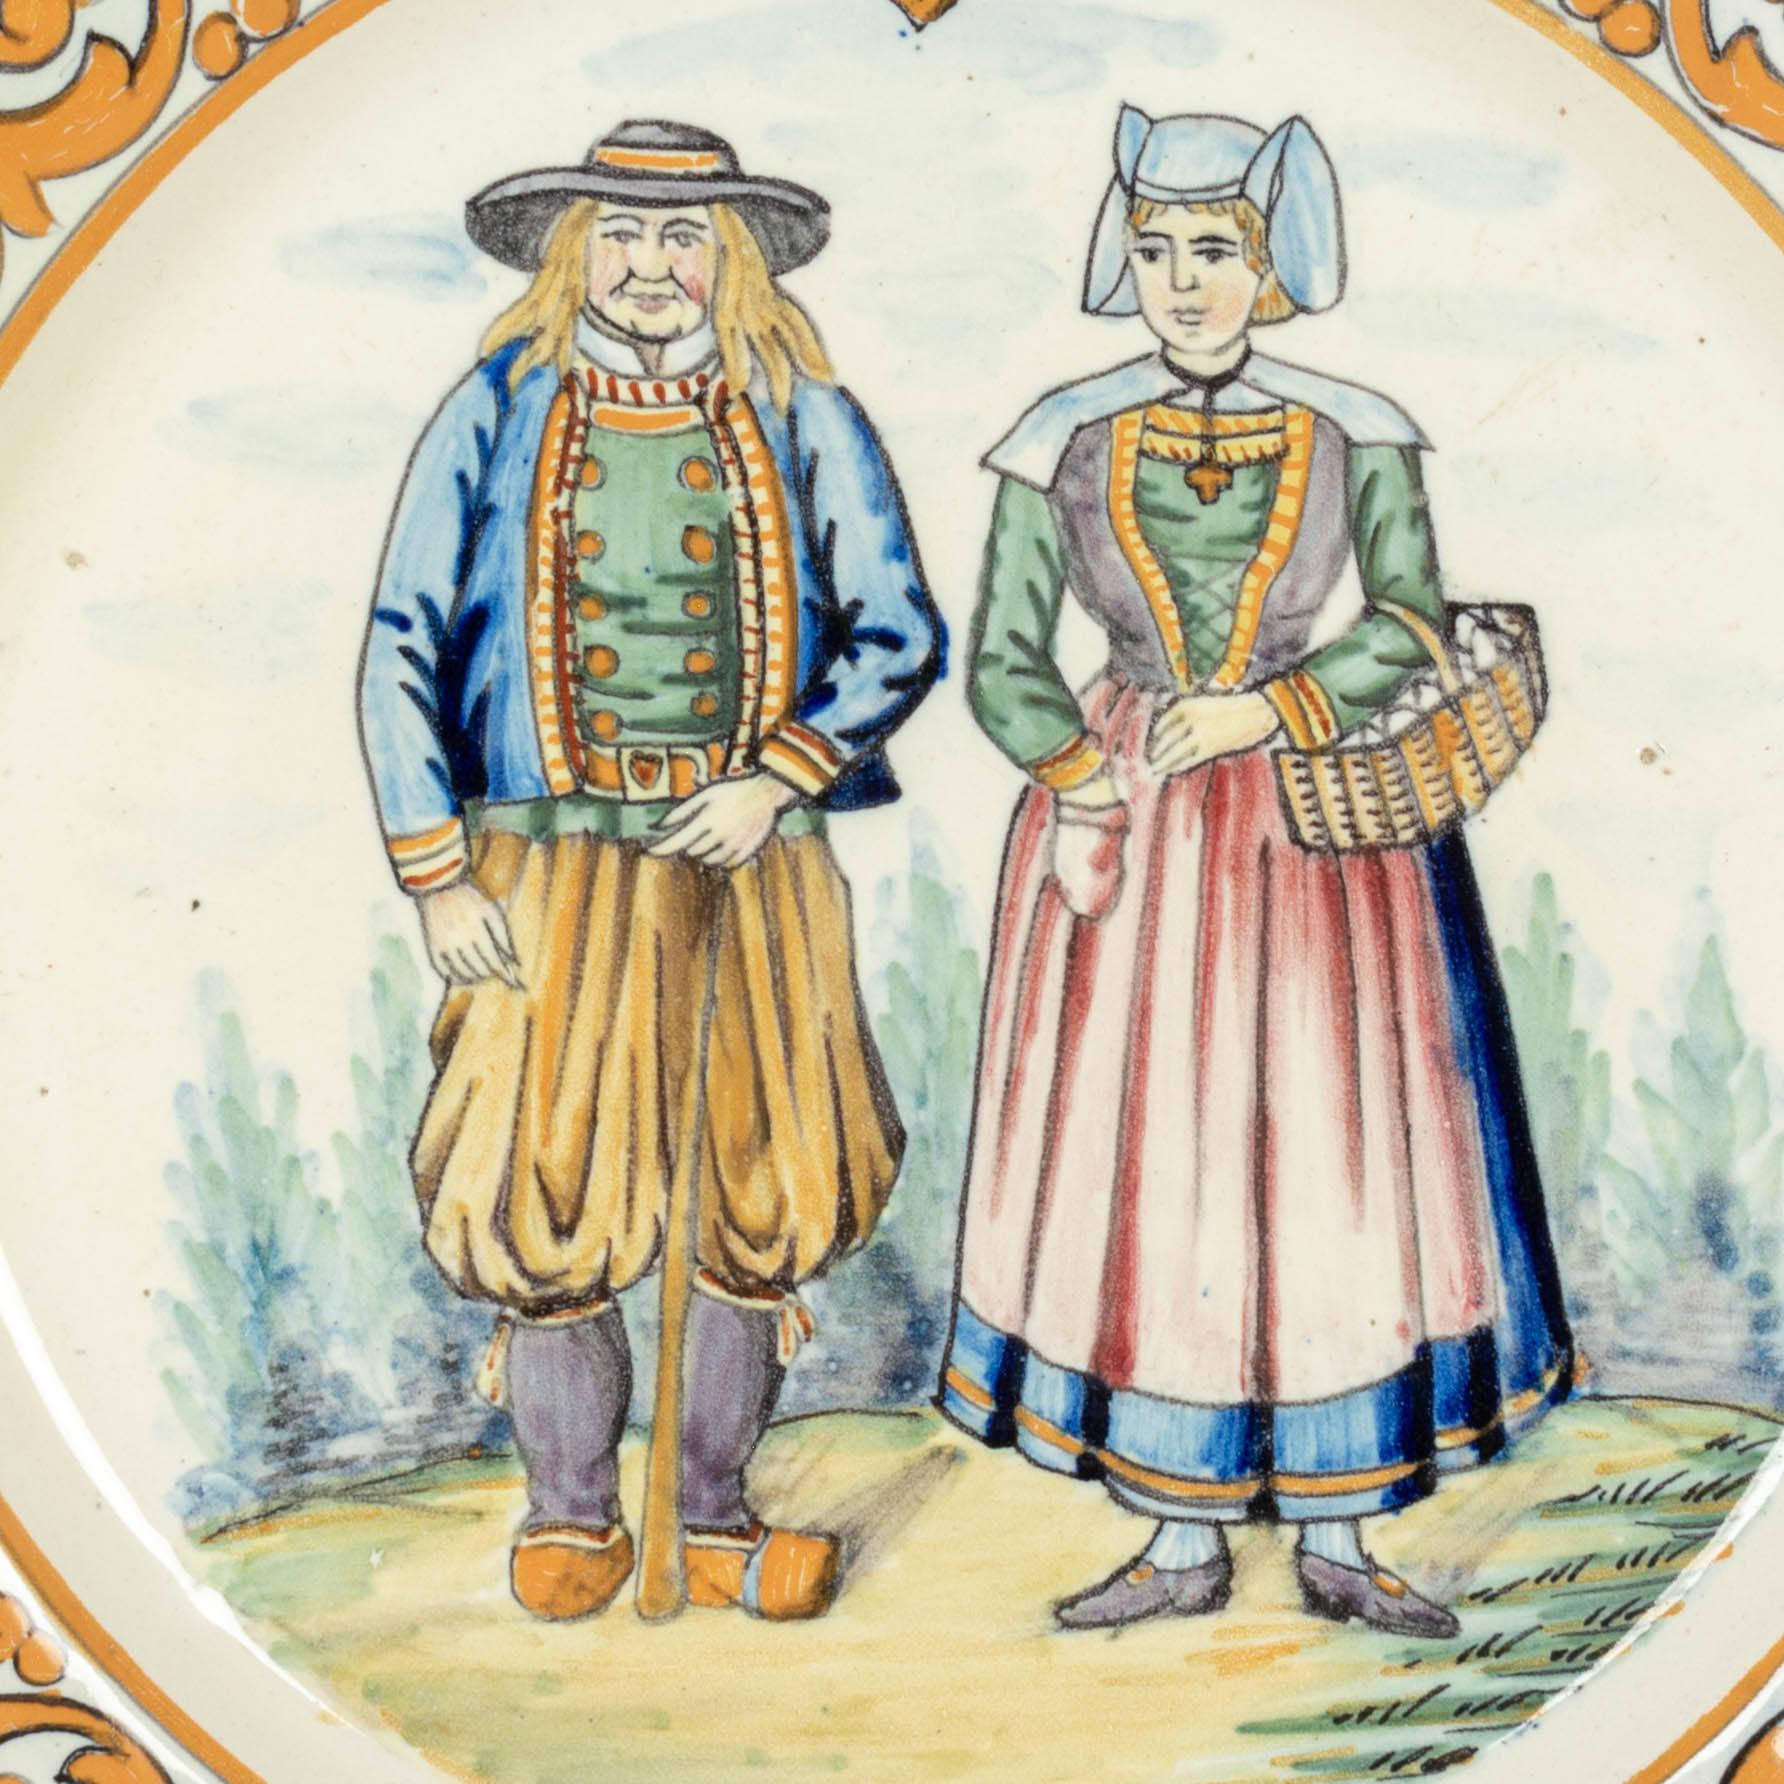 A Henriot Quimper French faience hand painted decorative plate, depicting a Breton couple in traditional clothing. Orange foliate border and with Quimper crown crest at the top. A good quality, thick plate with minor flaw to glaze on the rim. Mark